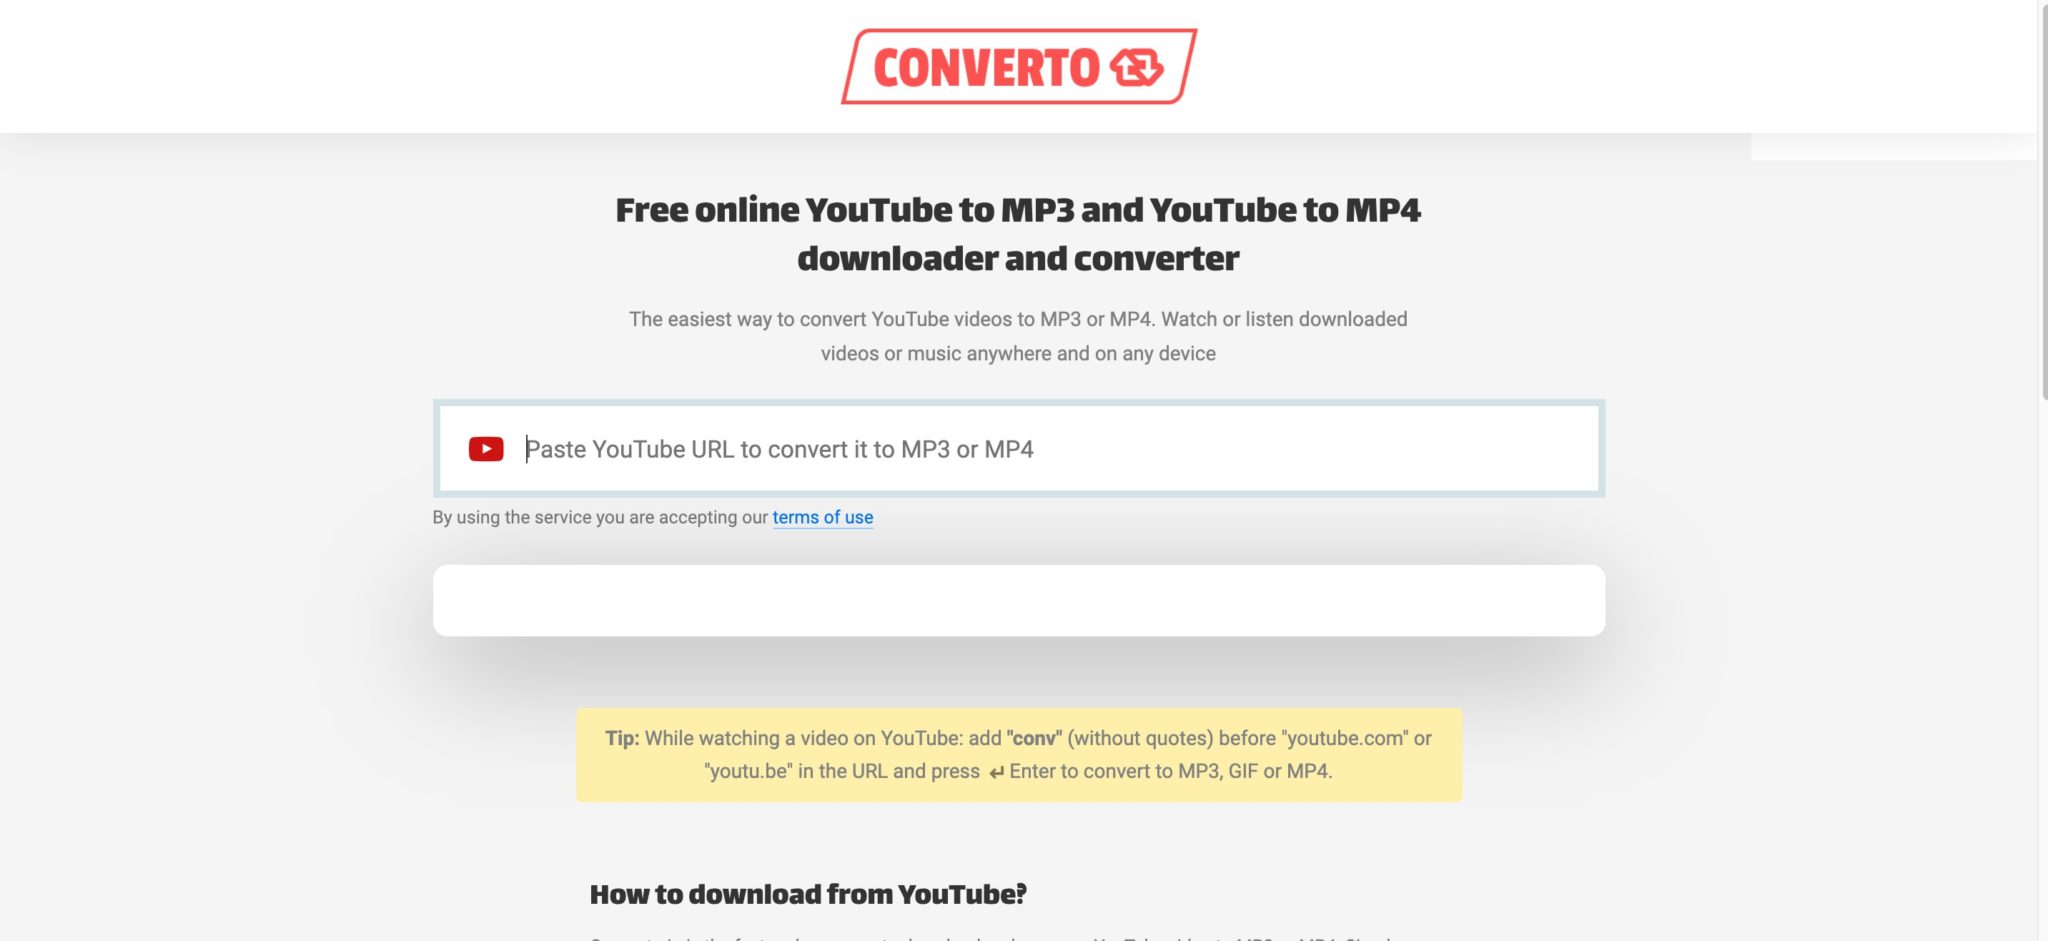 MP3Studio YouTube Downloader 2.0.23.1 instal the new